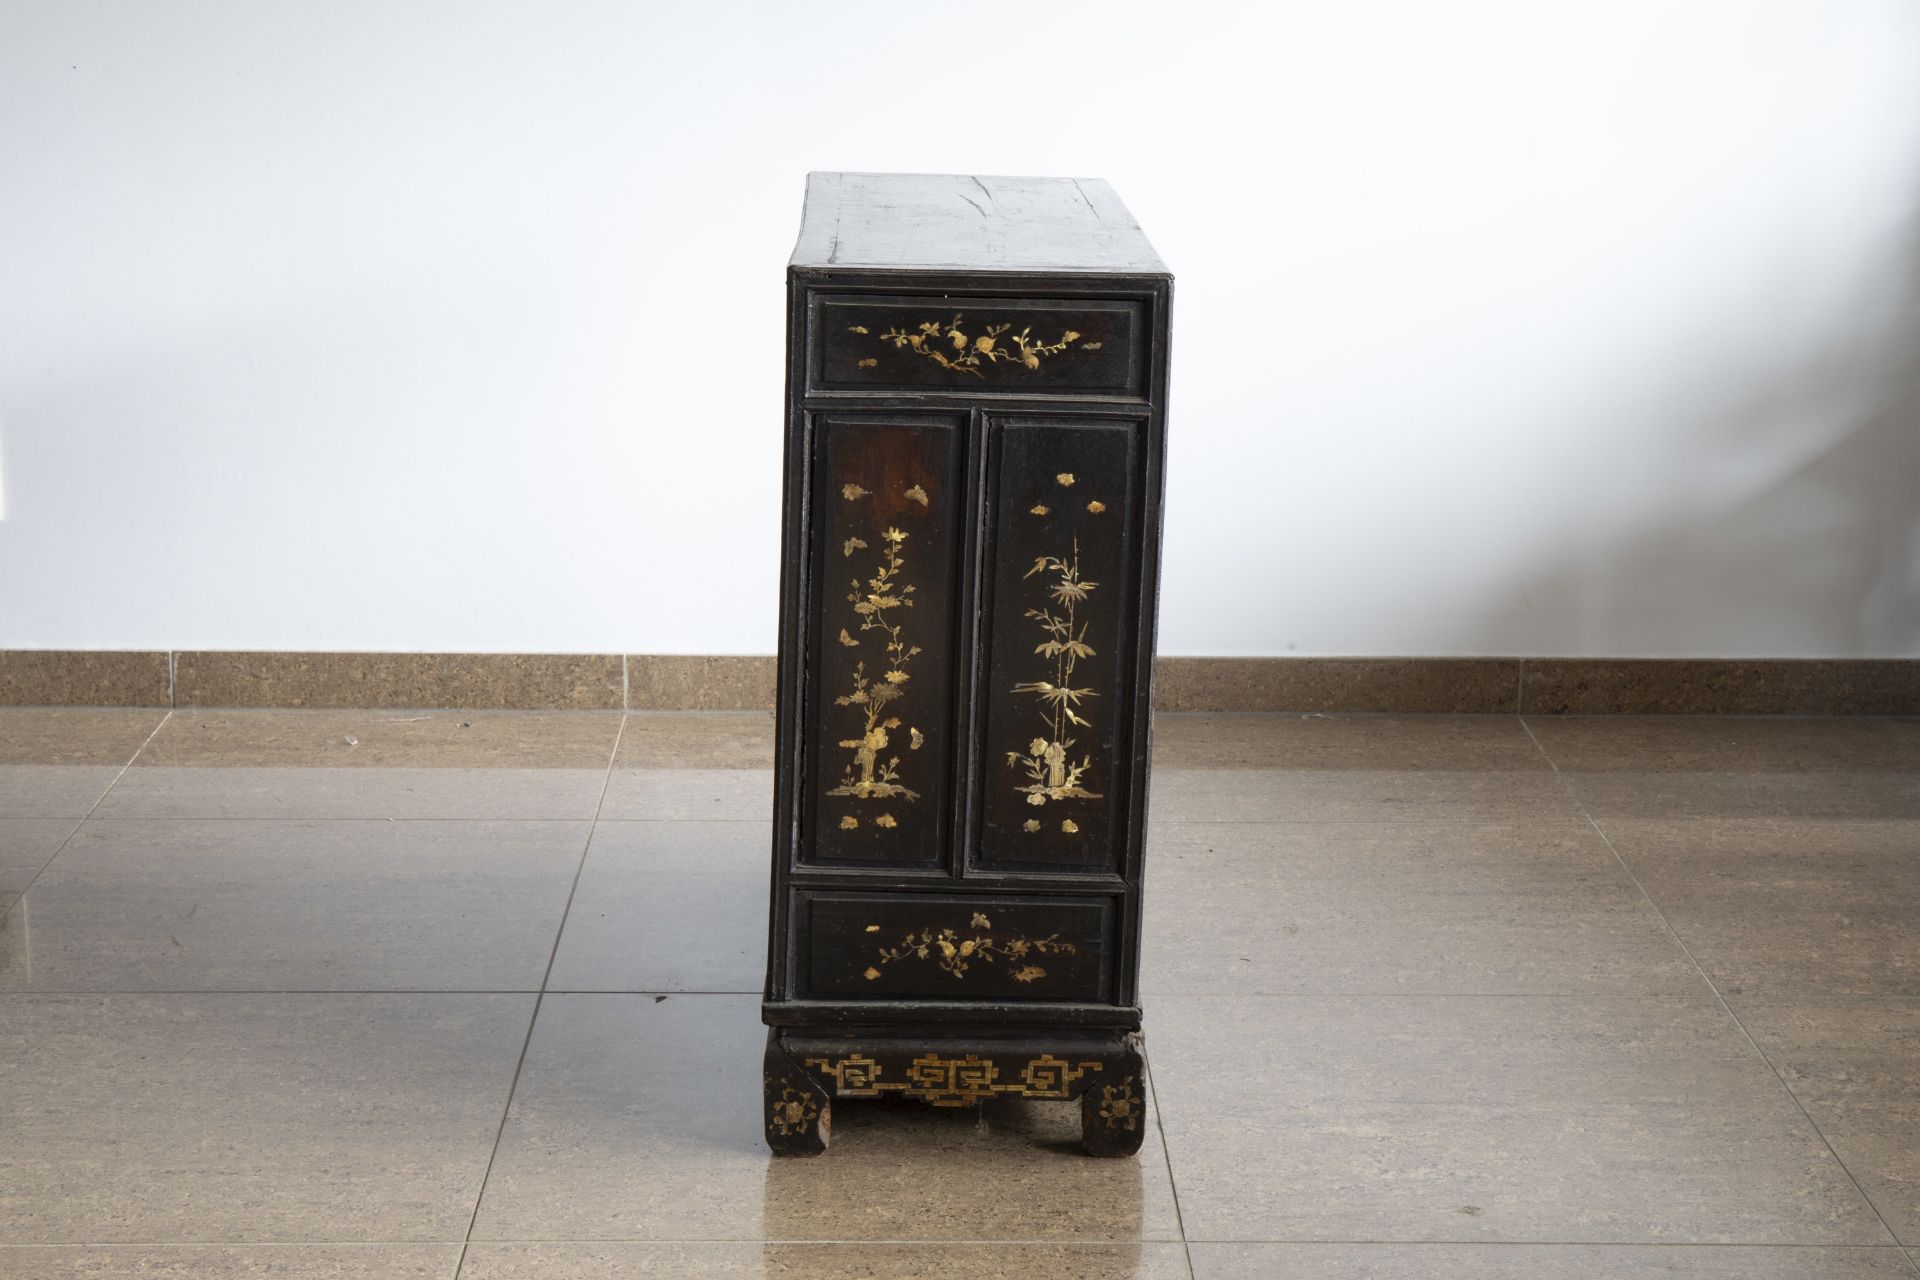 A Vietnamese mother-of-pearl inlaid wood two-door cabinet with figures in a palace garden and floral - Image 4 of 8